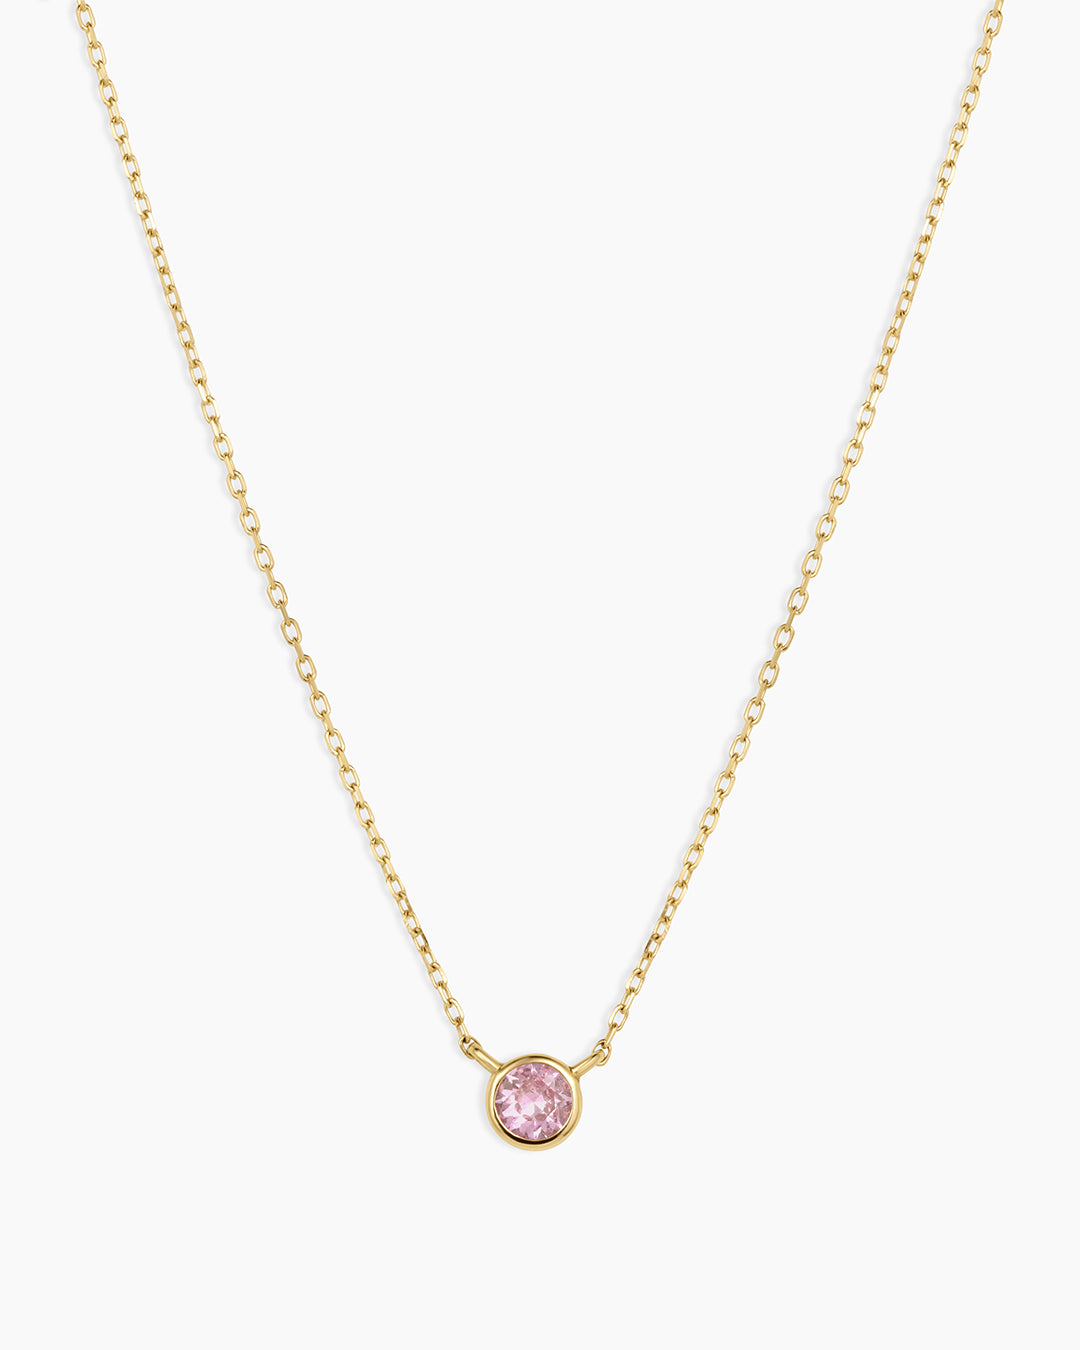 Threaded Elisa Gold Pendant Necklace in Pink Mix | Koerbers Fine Jewelry  Inc | New Albany, IN